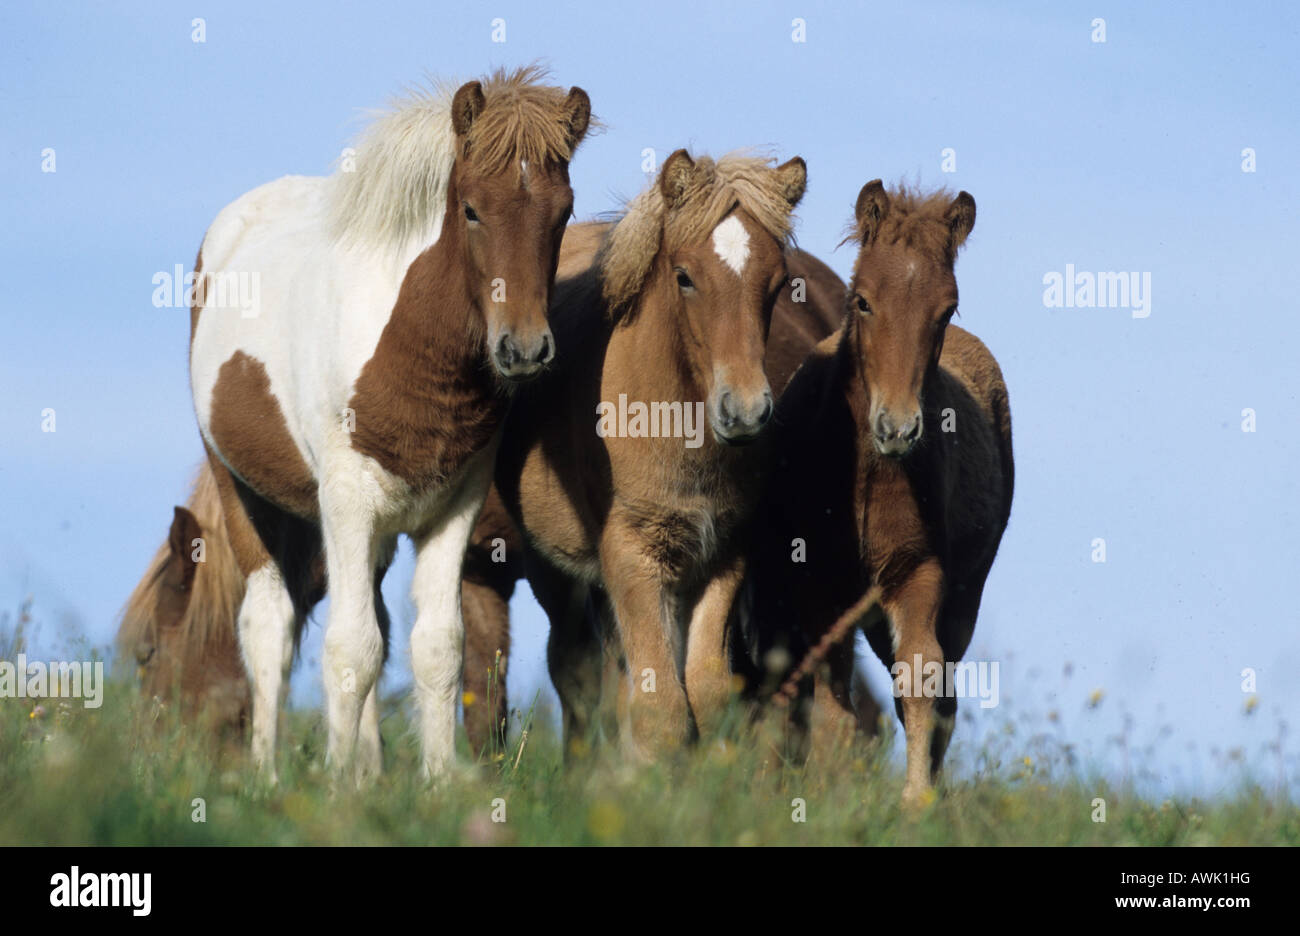 Icelandic Horse (Equus caballus), three foals standing together on a meadow Stock Photo